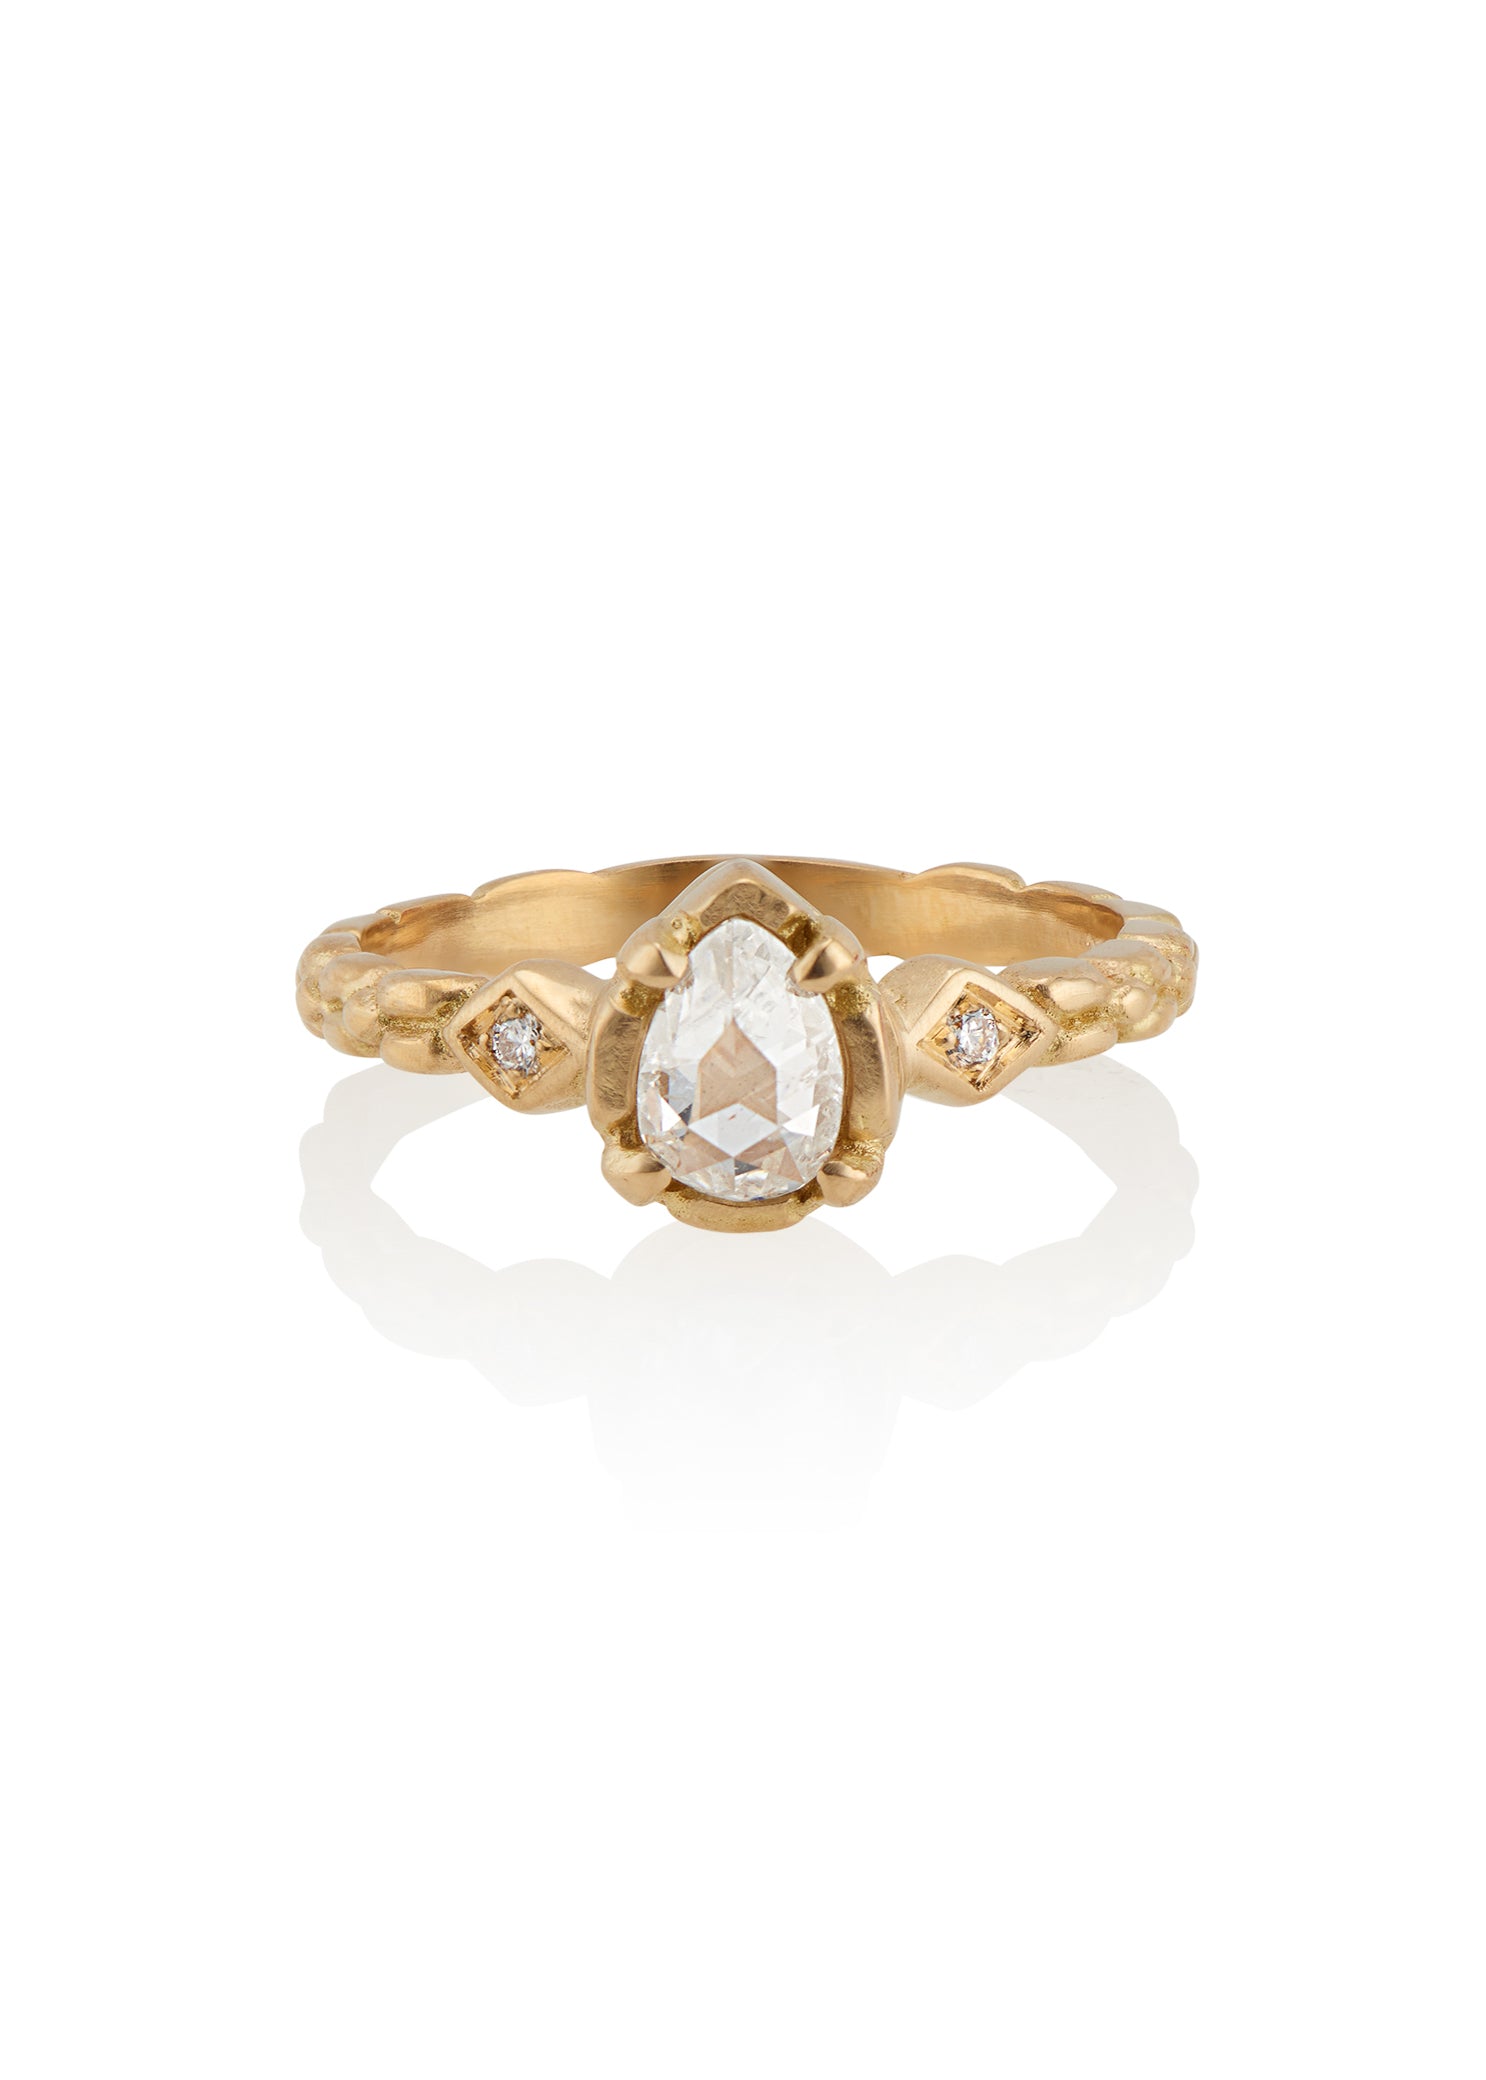 Stately and elegant, the Majestic ring is rich in exquisitely carved gold detail along the band, securing a pear-shaped rose cut diamond that commands attention—a piece evocative of royalty. 